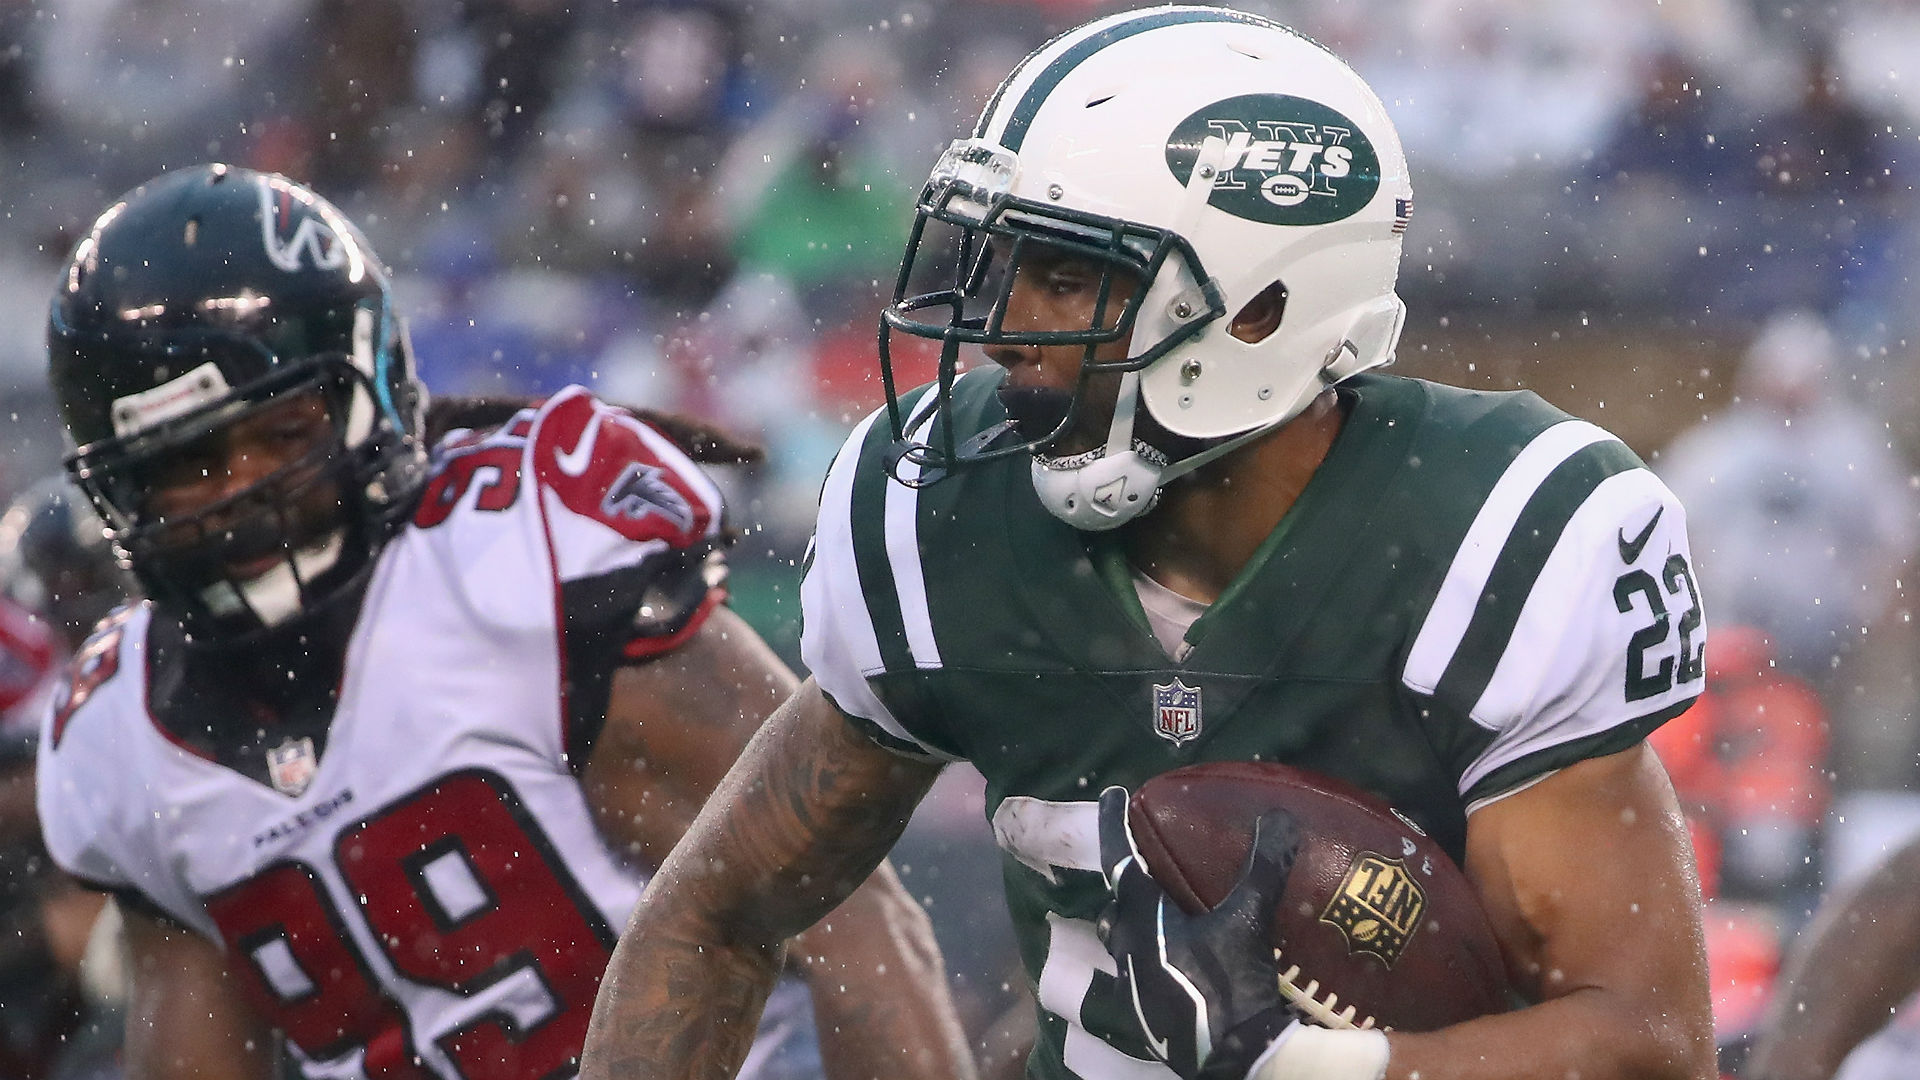 Jets RB Matt Forte ruled out Sunday, could miss more time